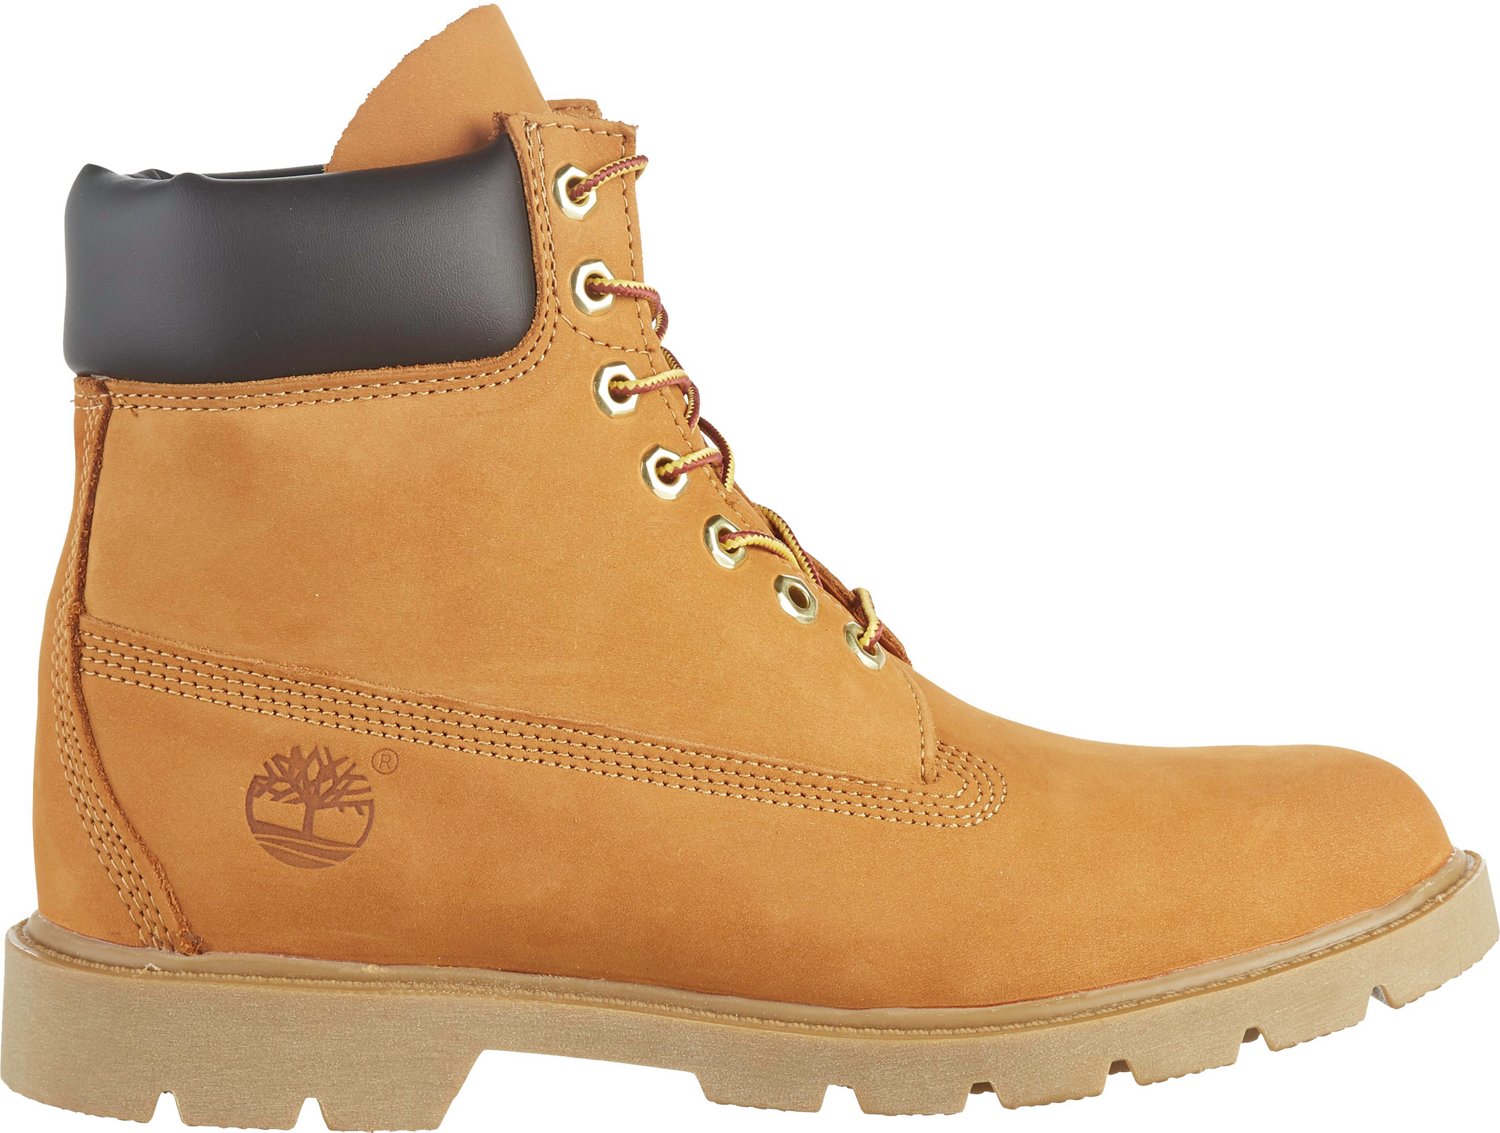 Timberland Men's Classic 6 inch Boots 